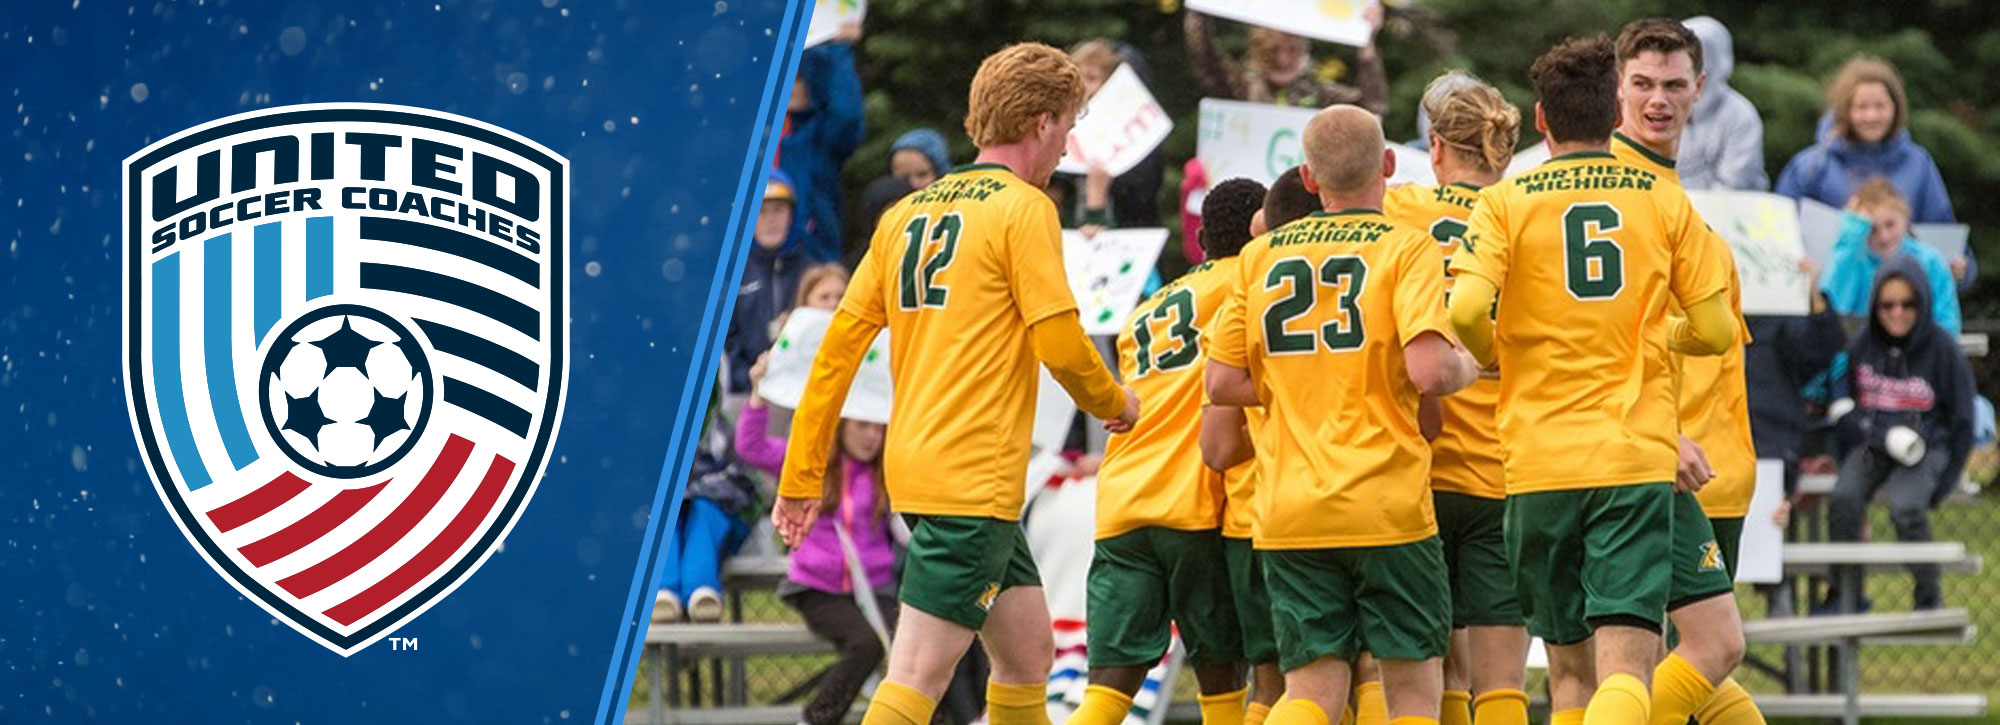 Northern Michigan Improves to No. 22 In United Soccer Coaches Rankings